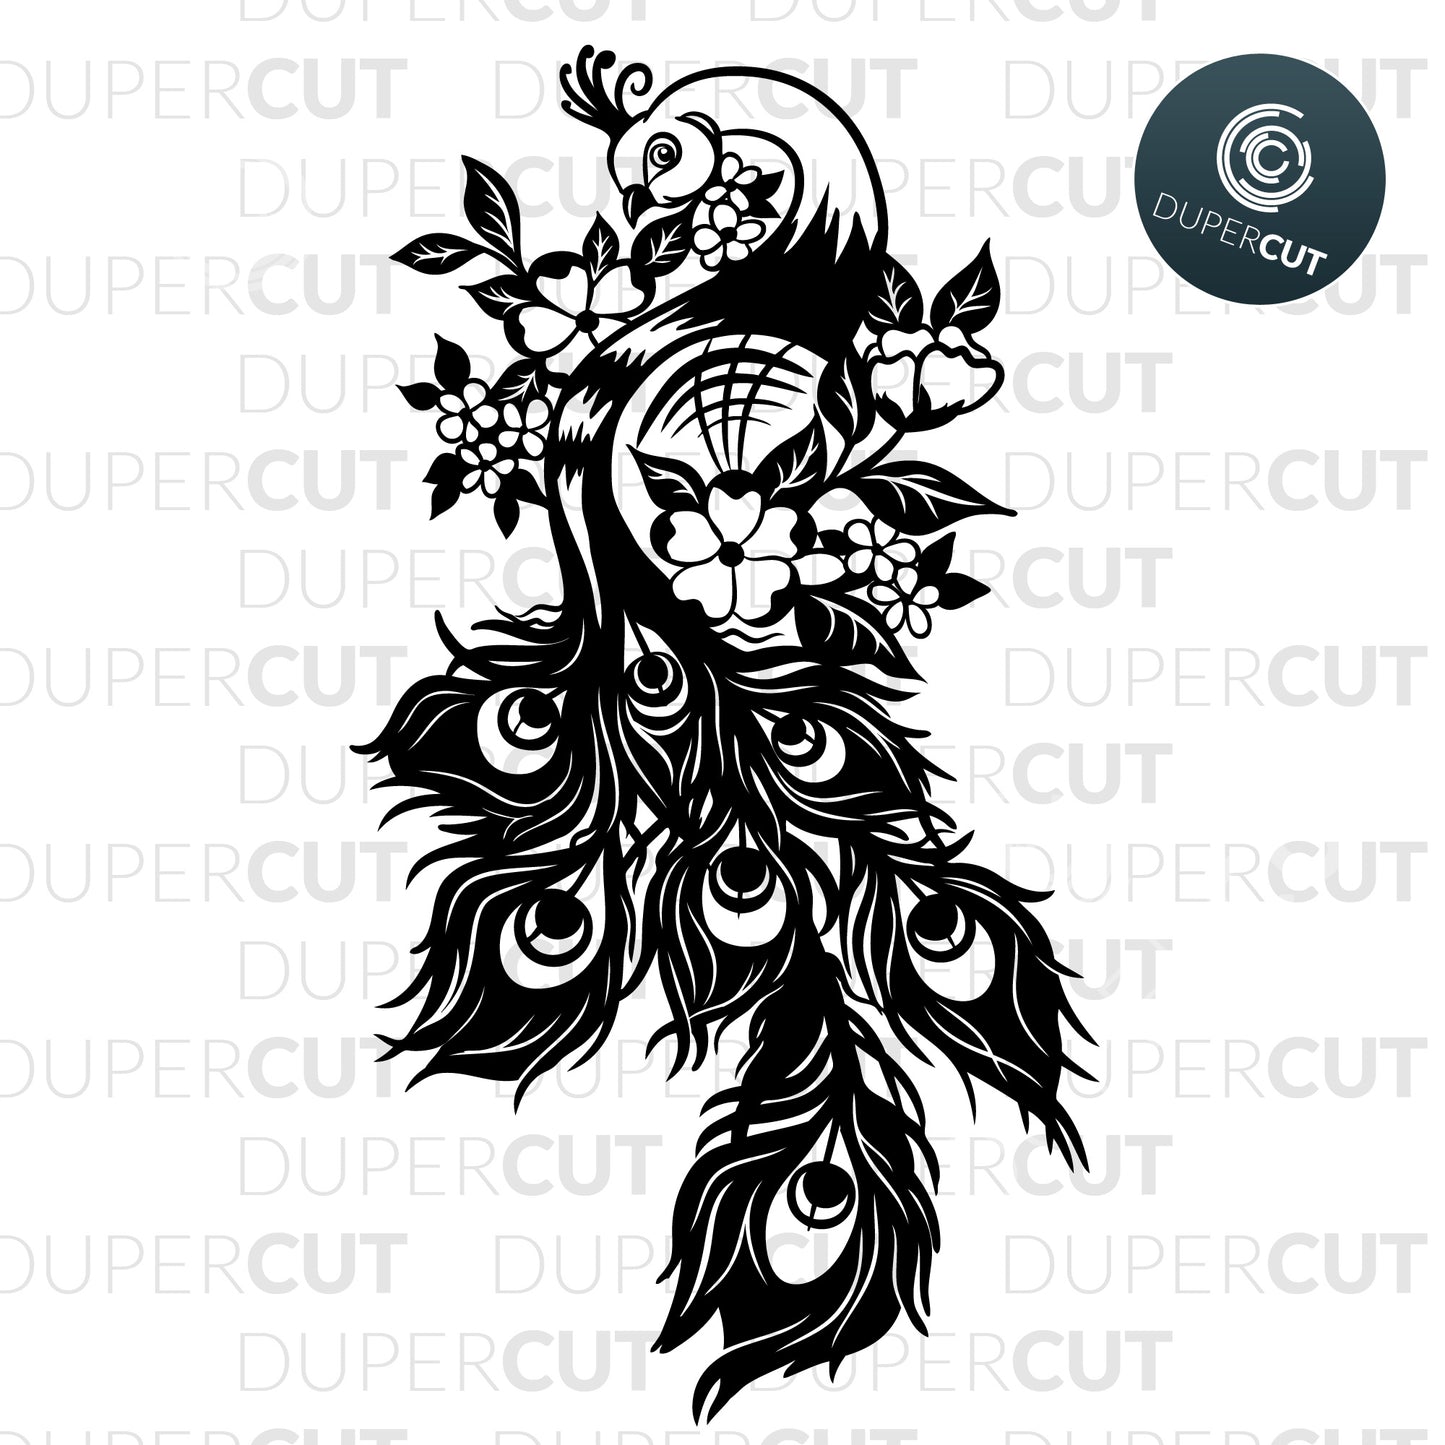 Peacock tattoo style design, custom original template for commercial use  - SVG DXF JPEG files for CNC machines, laser cutting, Cricut, Silhouette Cameo, Glowforge engraving